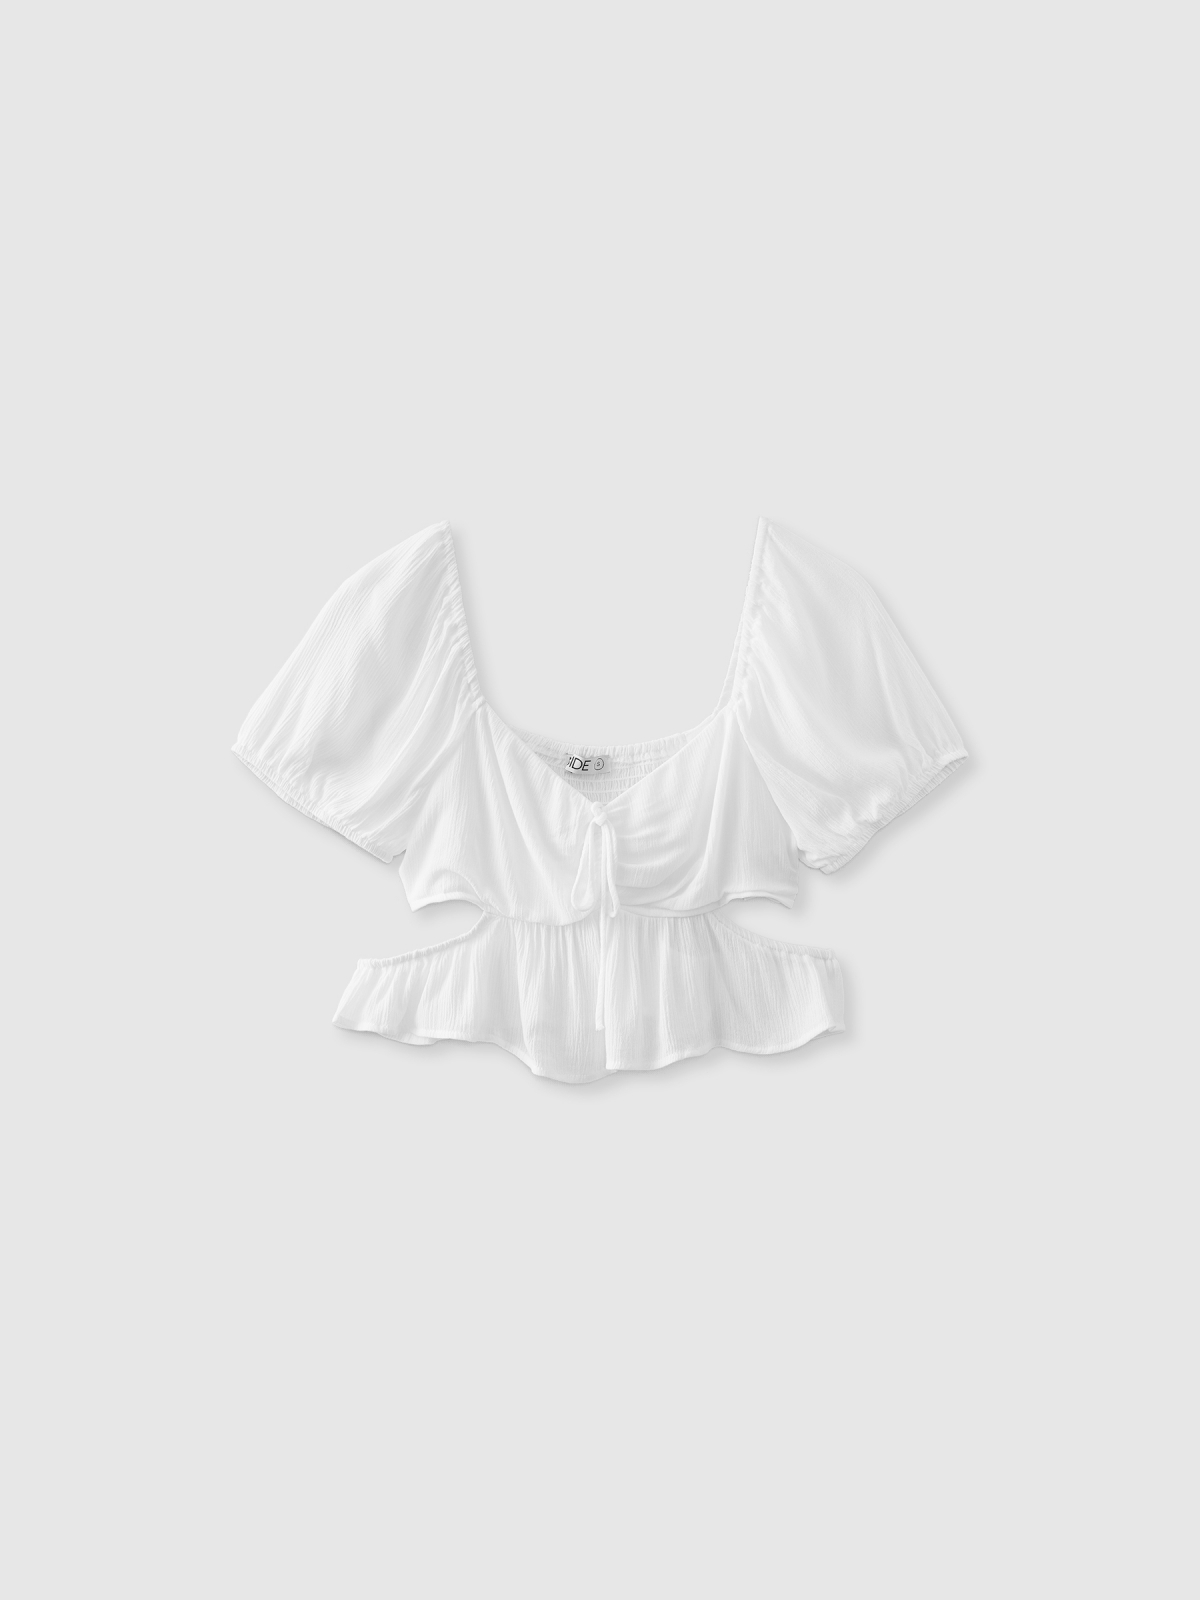  Blouse puffed cut out white